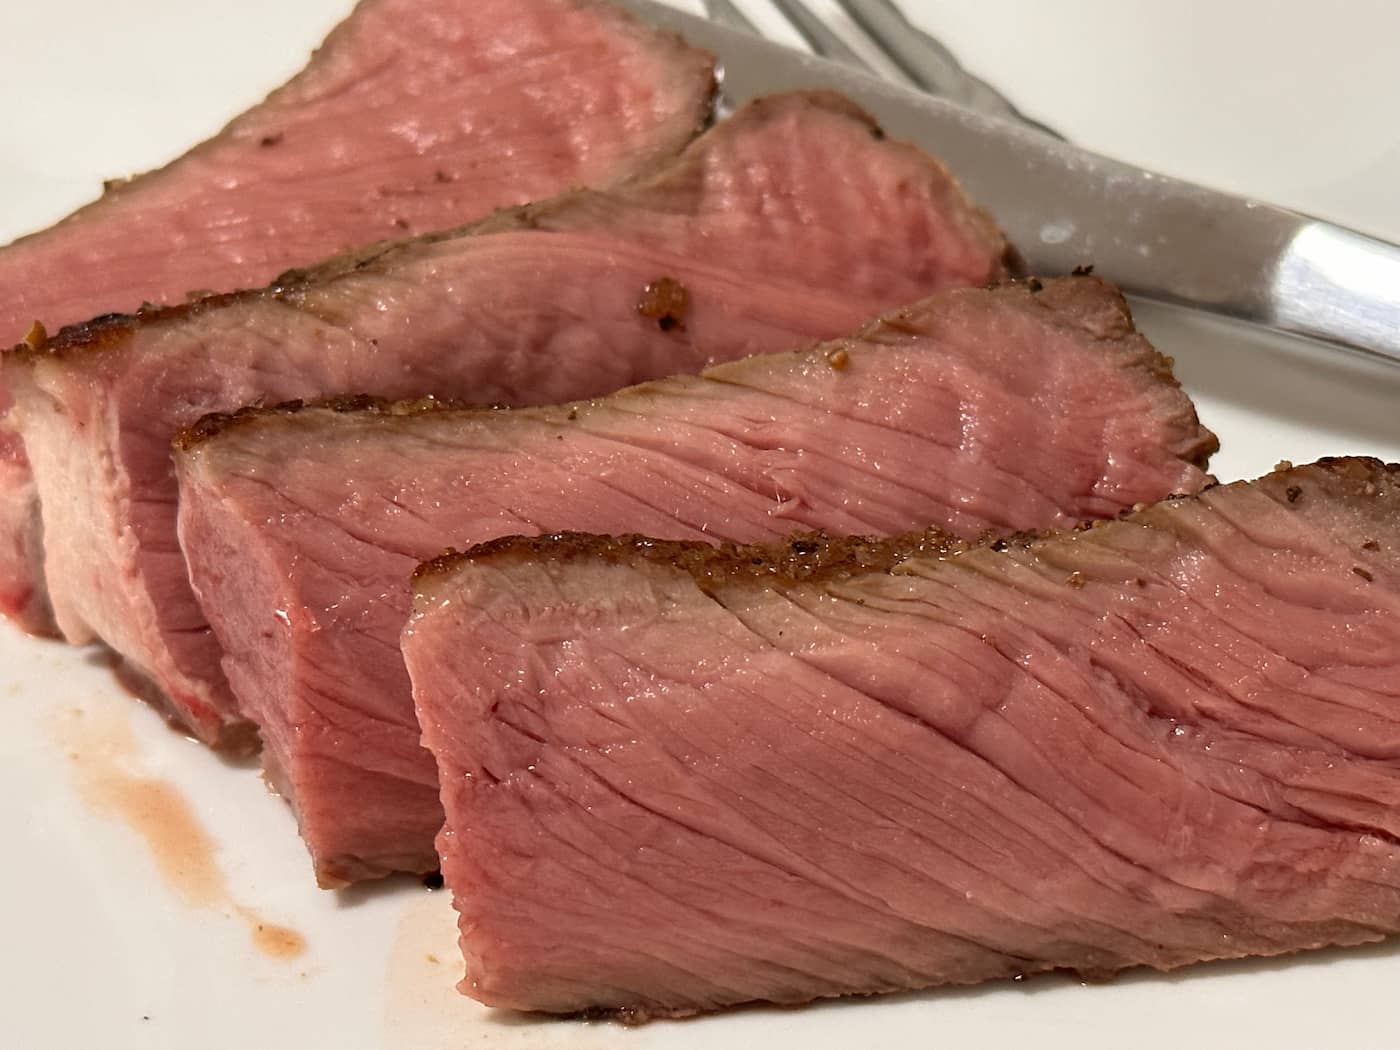 Steak cut into slices, served on a plate and ready to be eaten.